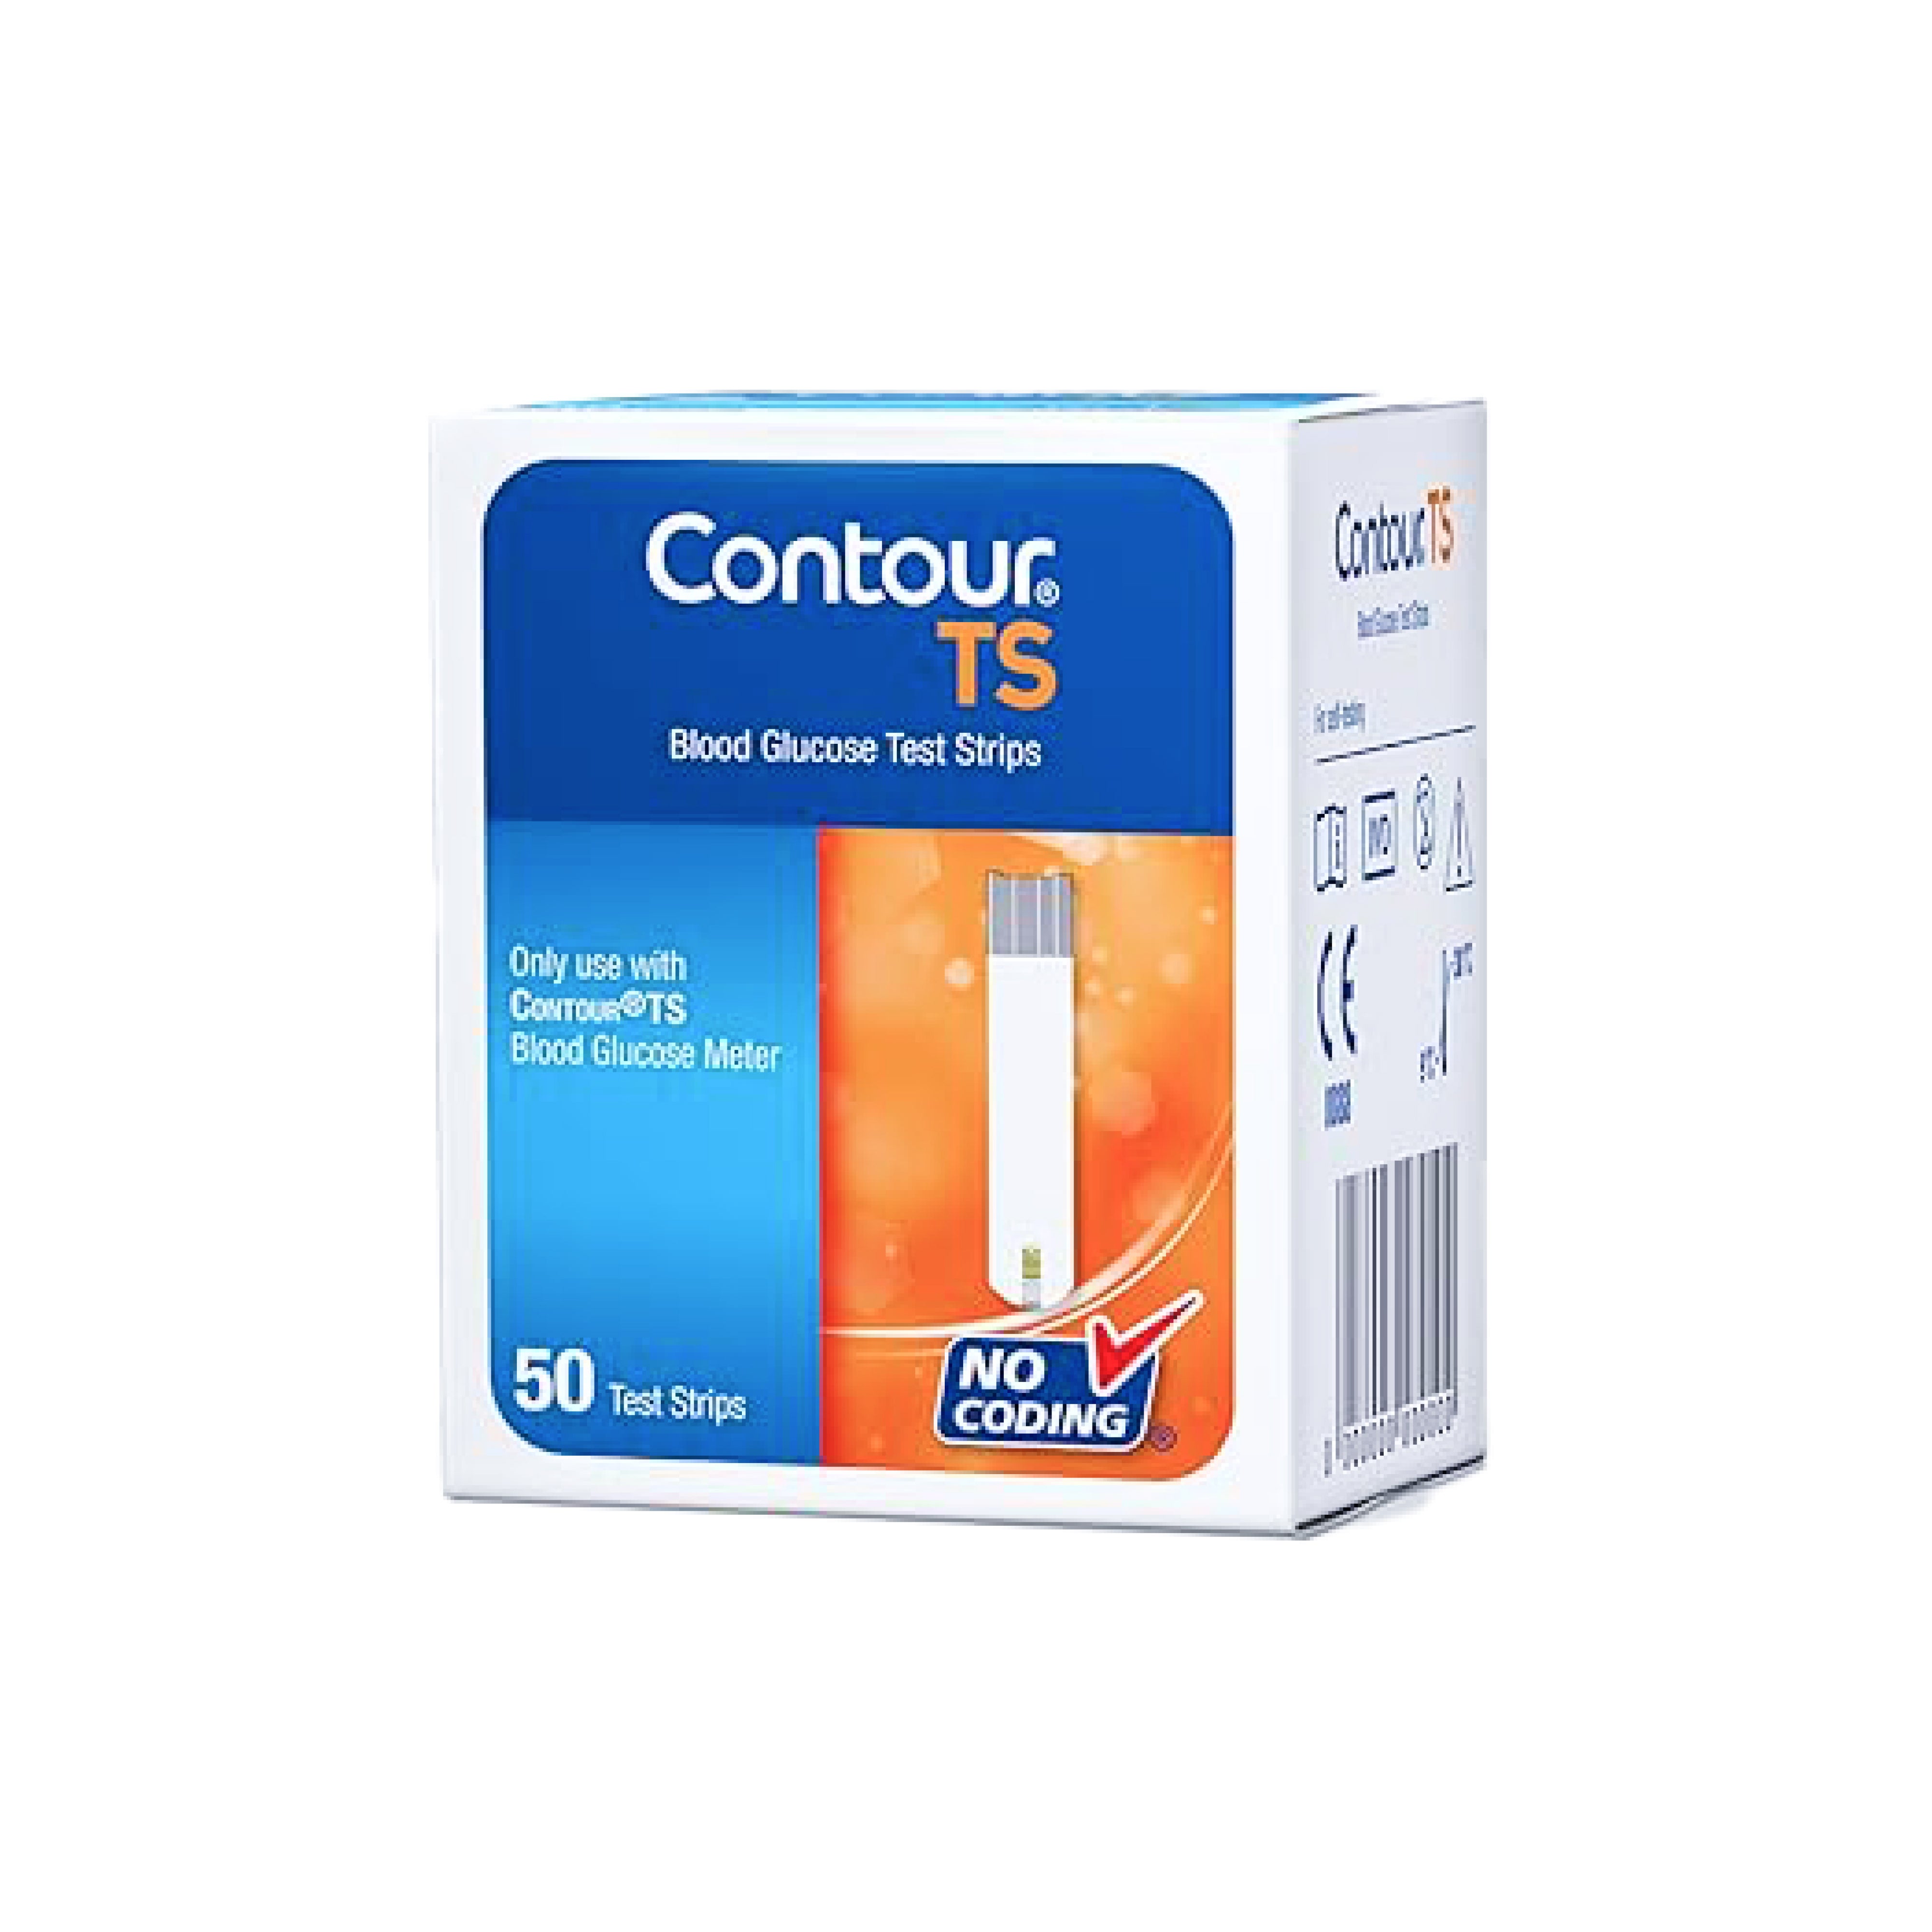 Contour TS - 100 Test Strips(50 x 2) + 100 Prickease Lancets + 100 Safewipe Alcohol Swabs